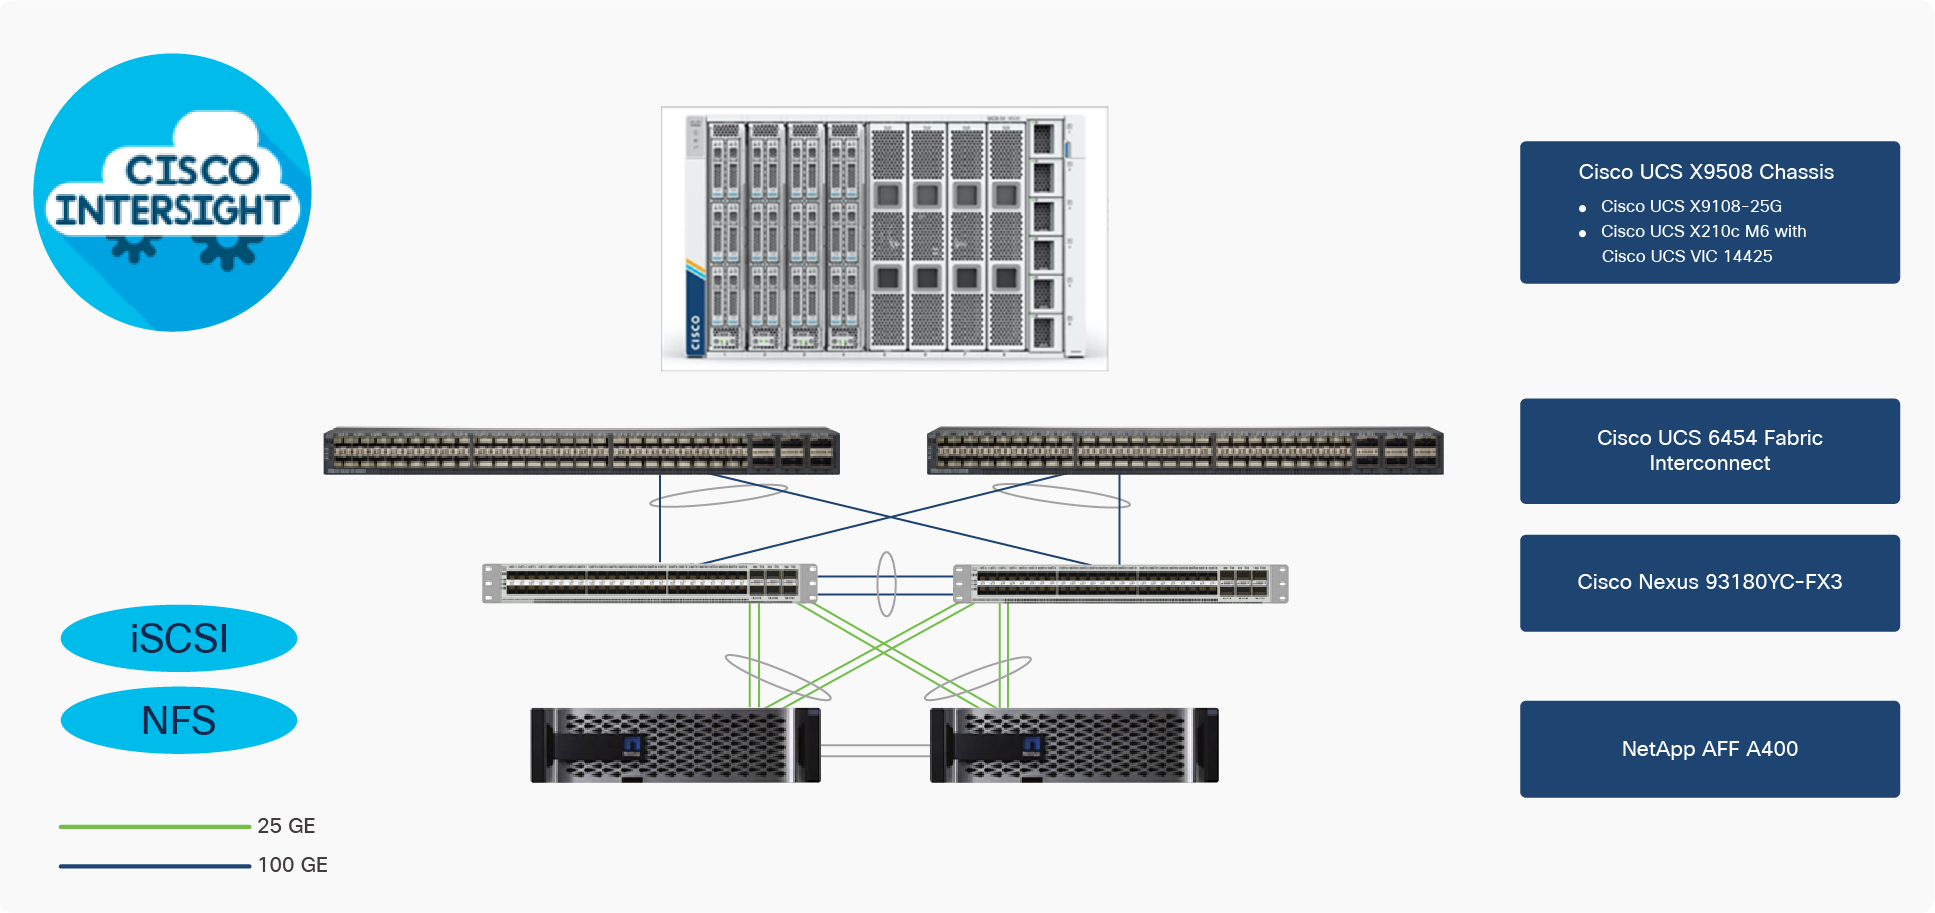 FlexPod Datacenter physical topology for iSCSI and NFS